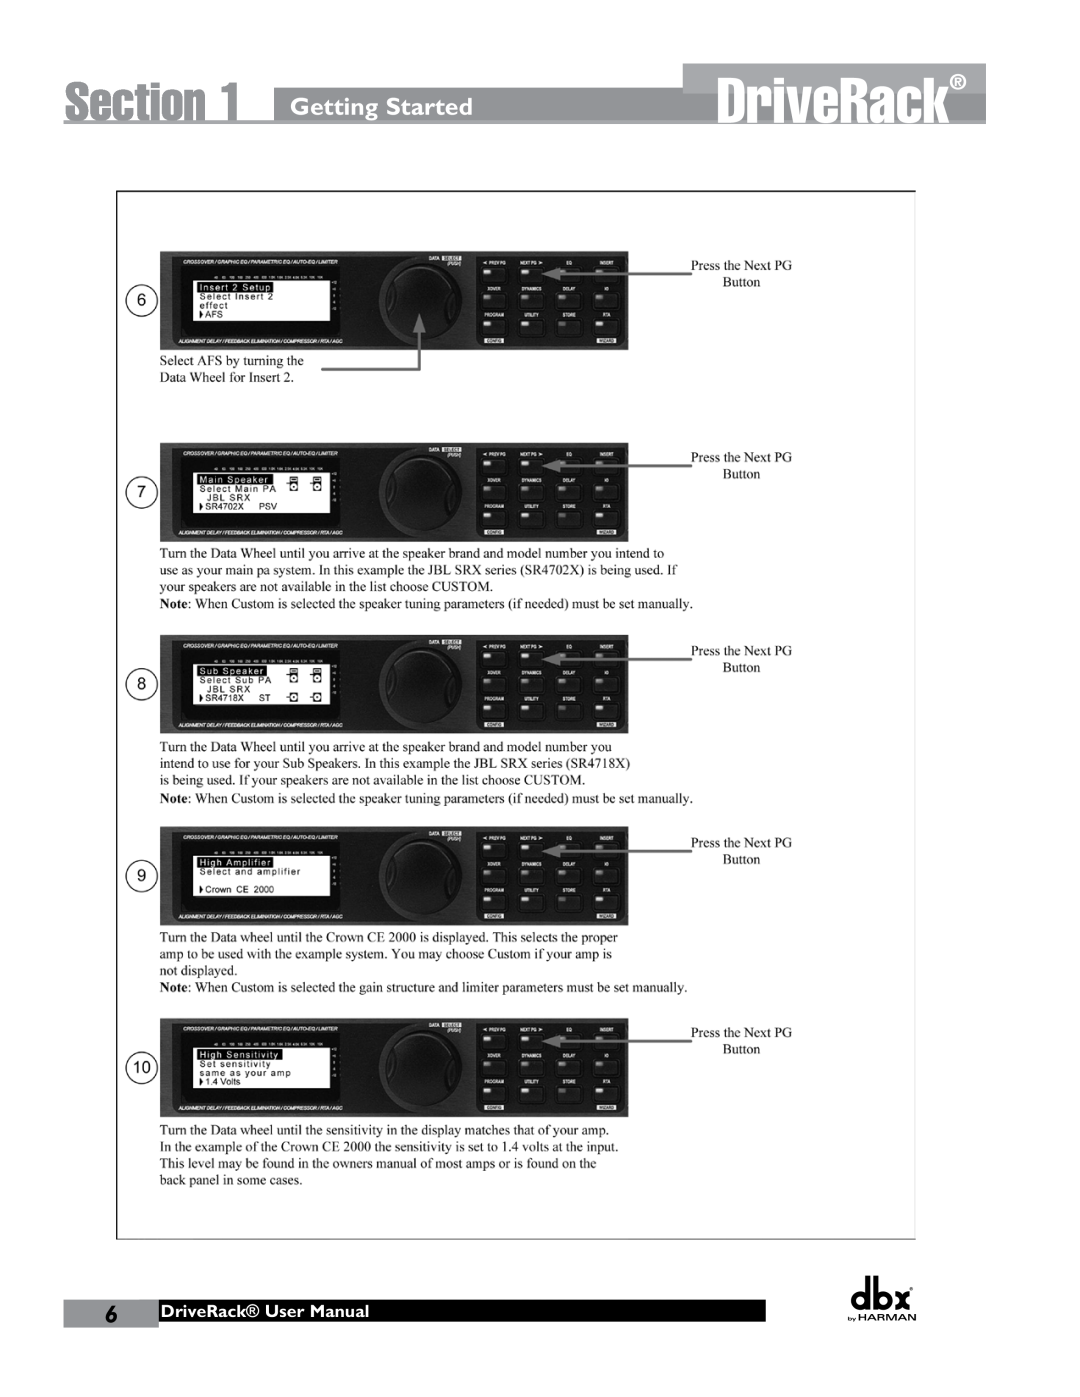 JBL 260 user manual Section, Getting Started, DriveRack User Manual 